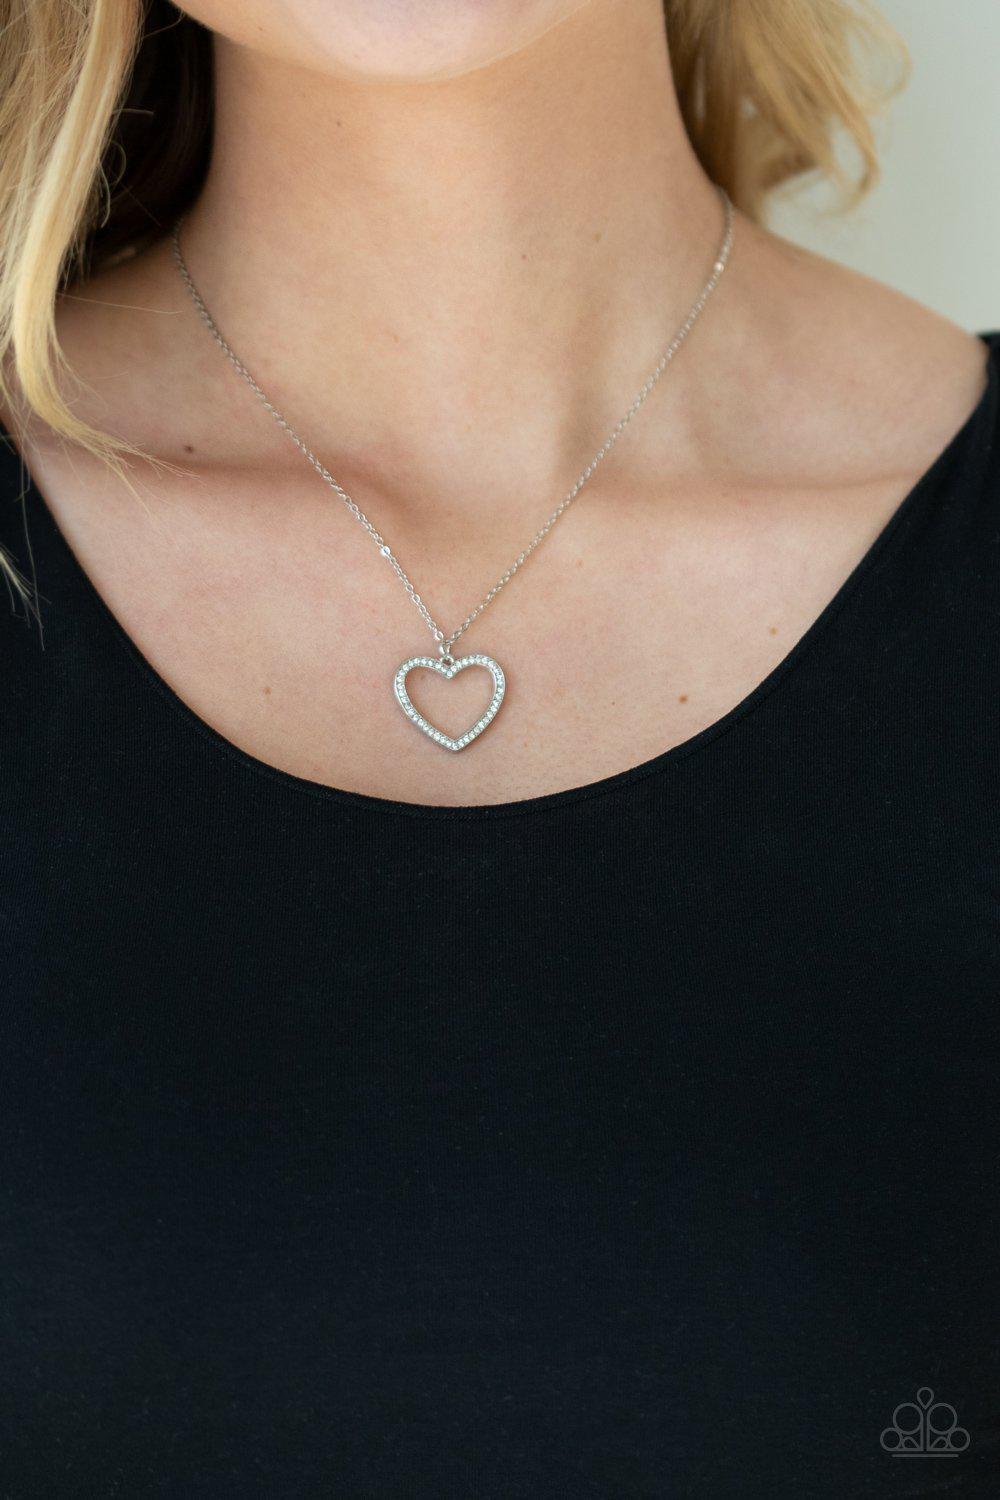 If You LUST - White Rhinestone Heart Necklaces – Lady T Accessories